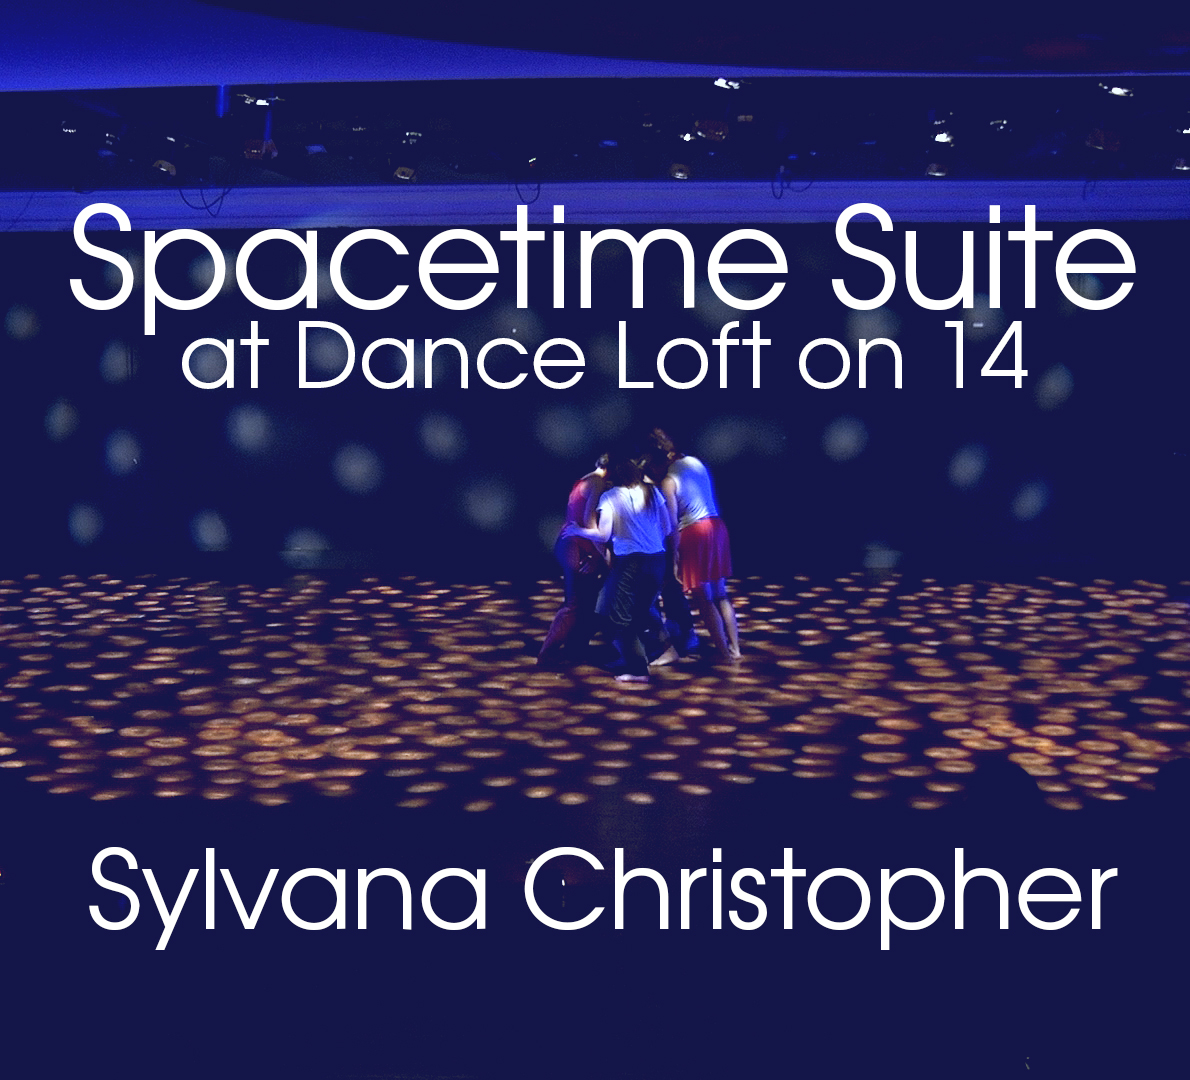 Spacetime Suite at Dance Loft on 14 by Sylvana Christopher